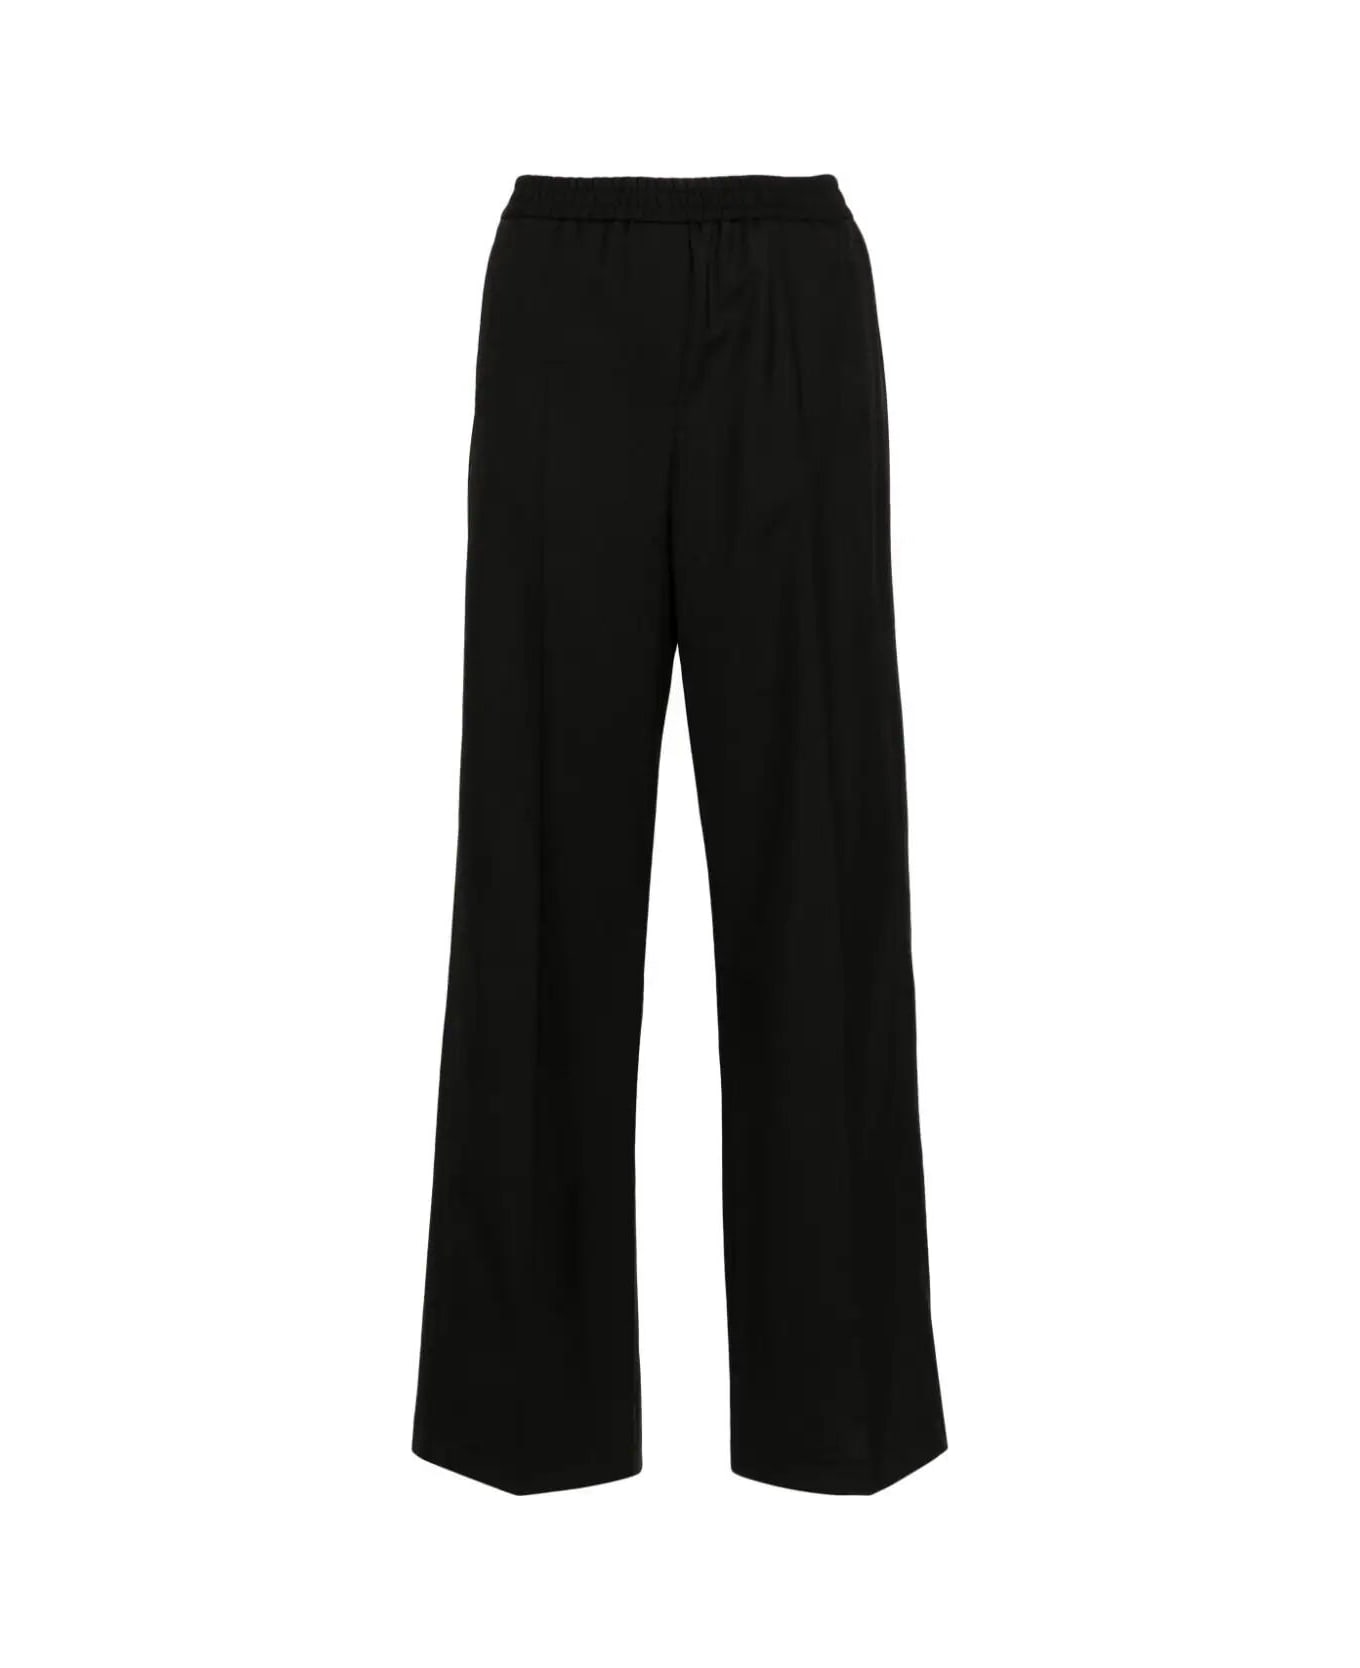 PS by Paul Smith Regular Trouser - Black ボトムス